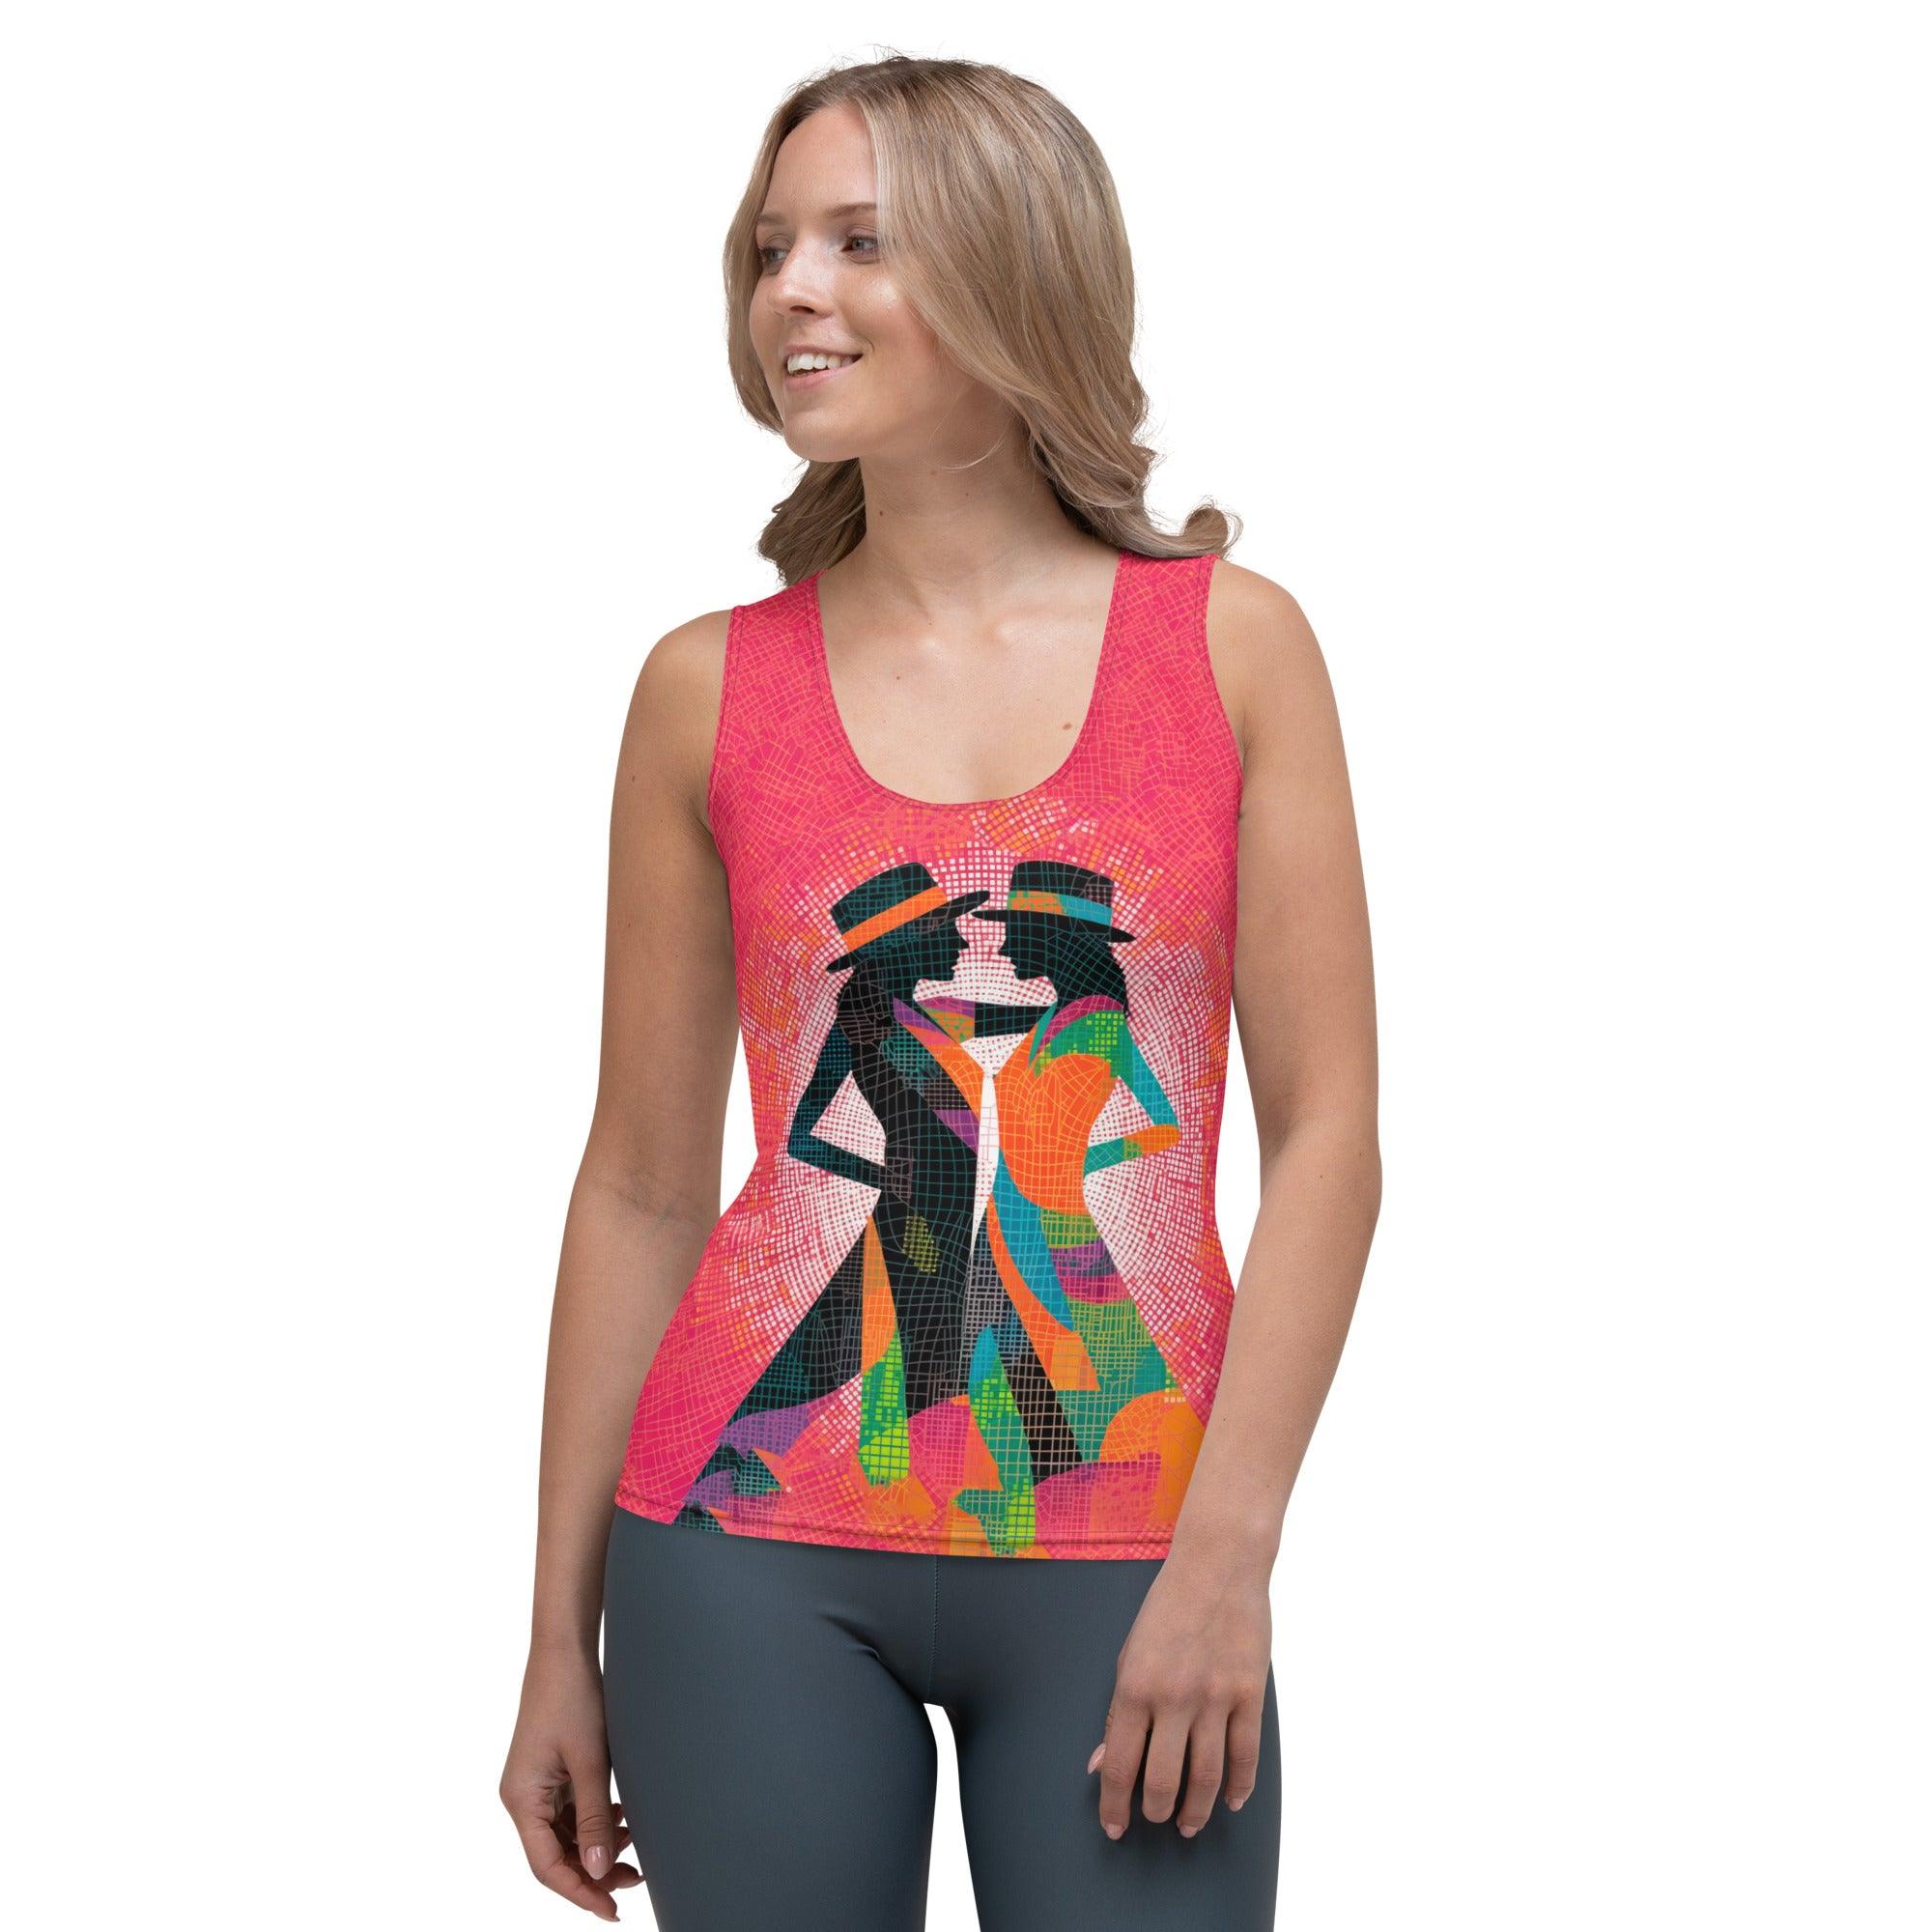 Elegant Balletic Reflections Style Tank Top in Action